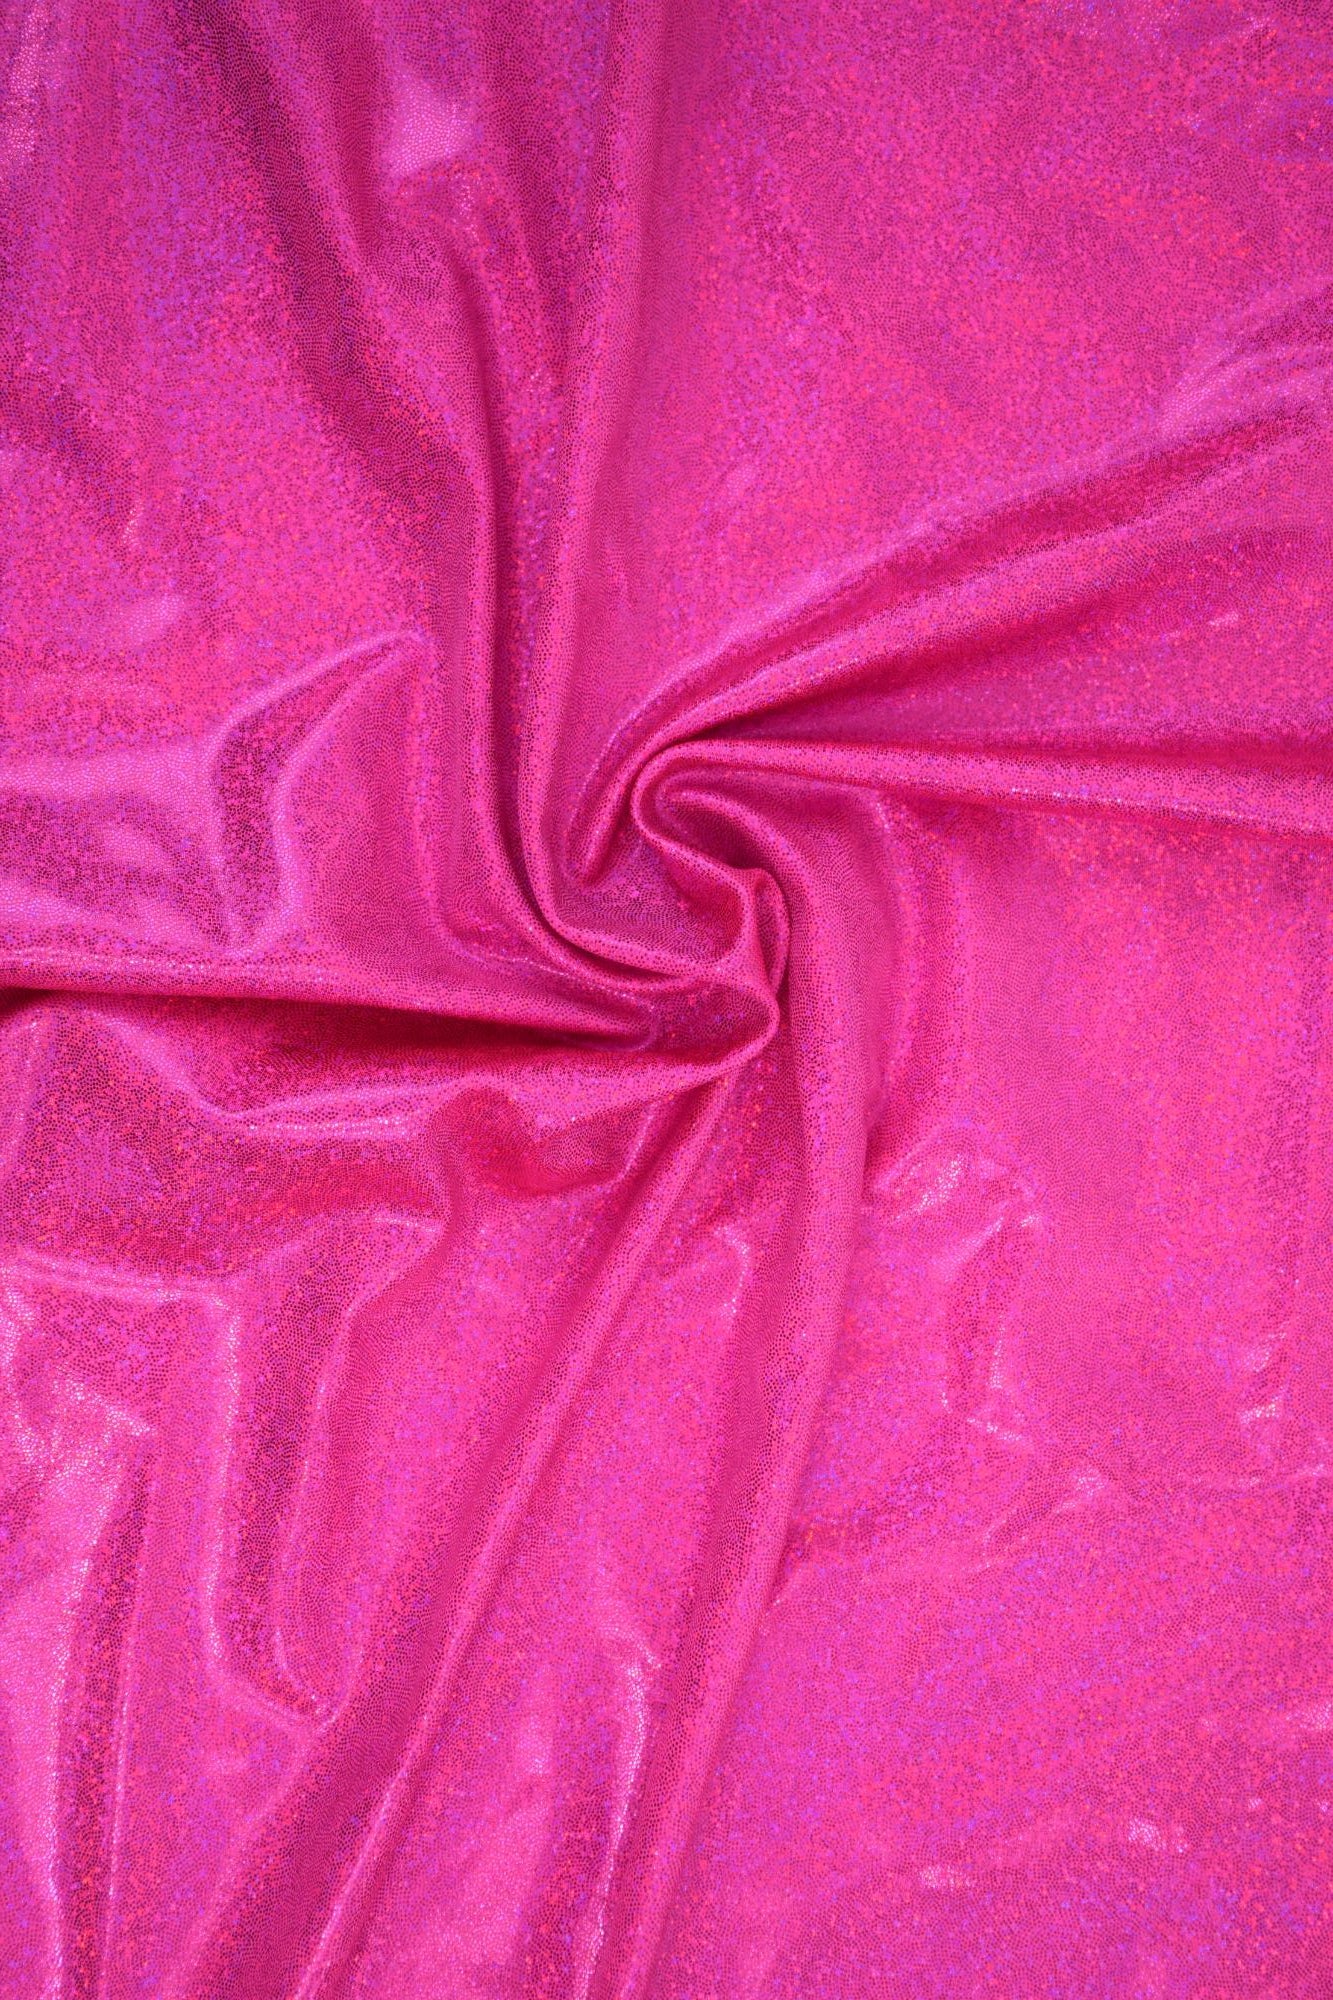 Hot Pink Velvet Fabric By The Yard | 4 Way Stretch